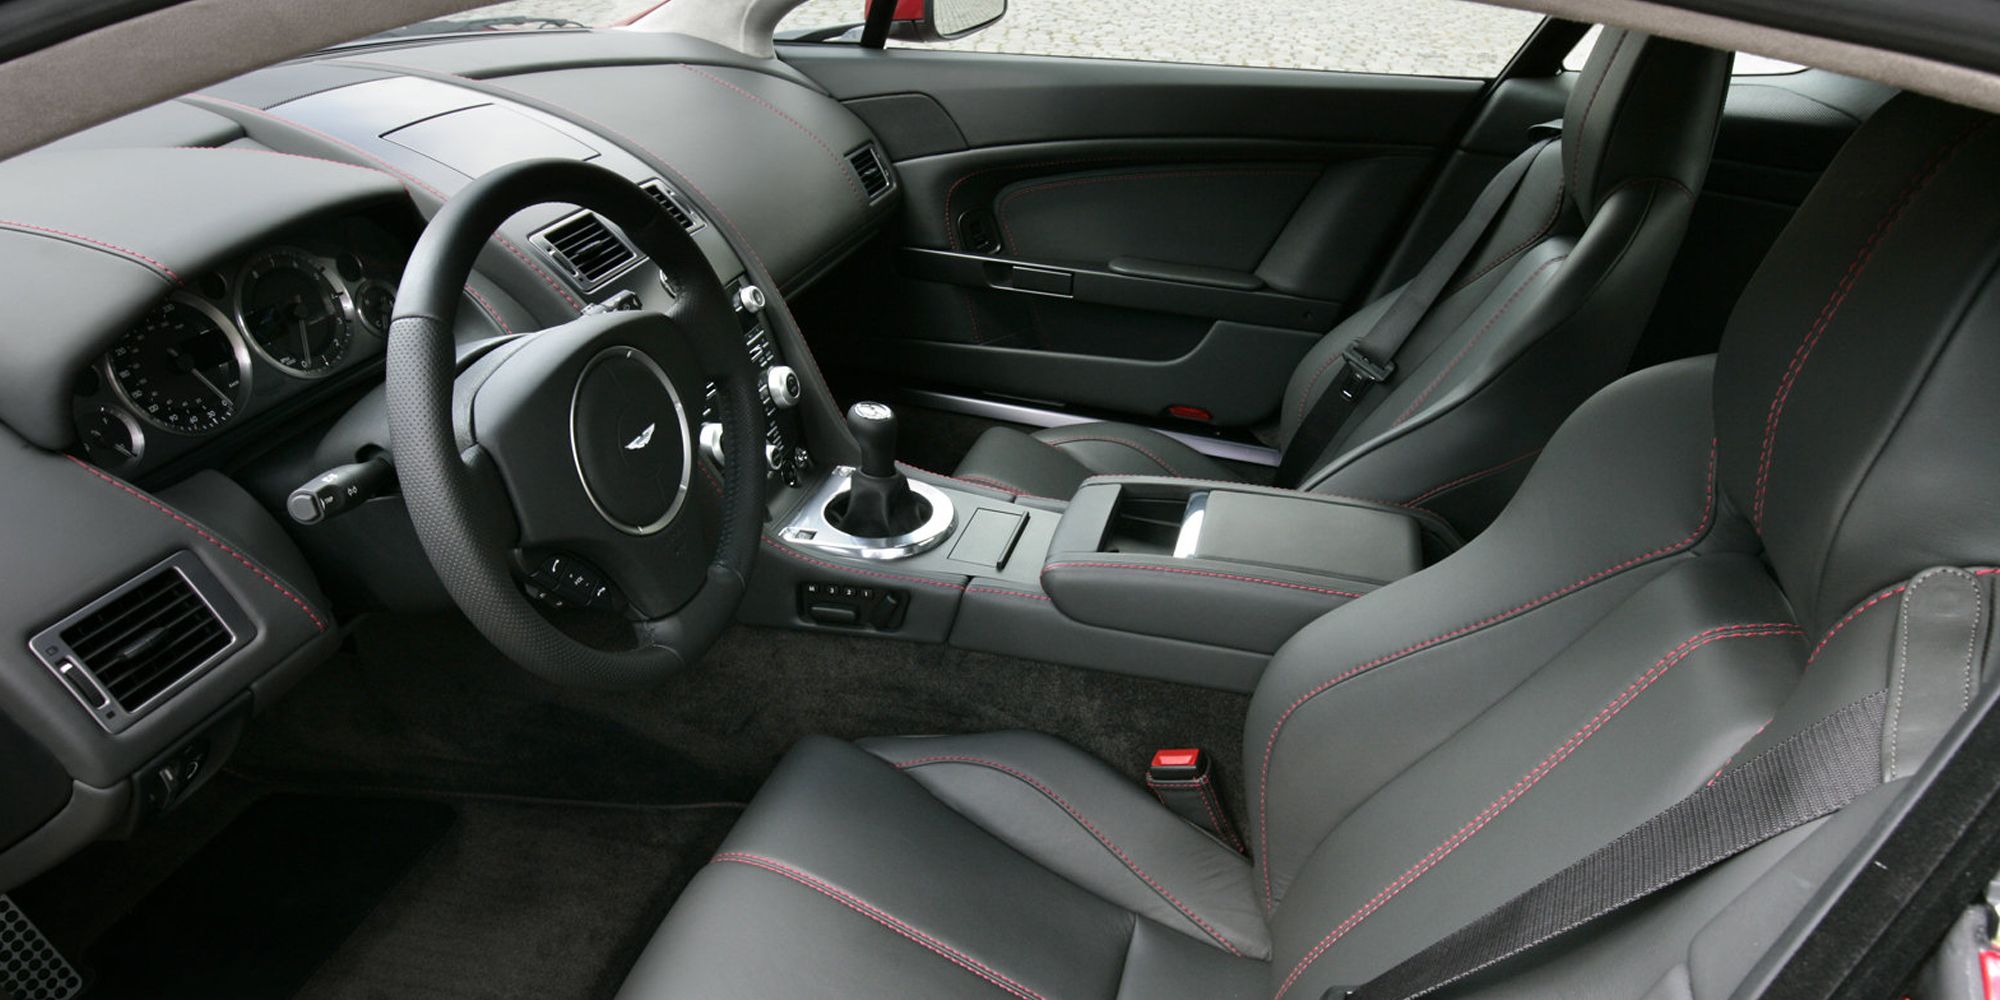 The interior of the V8 Vantage, black leather with red stitching